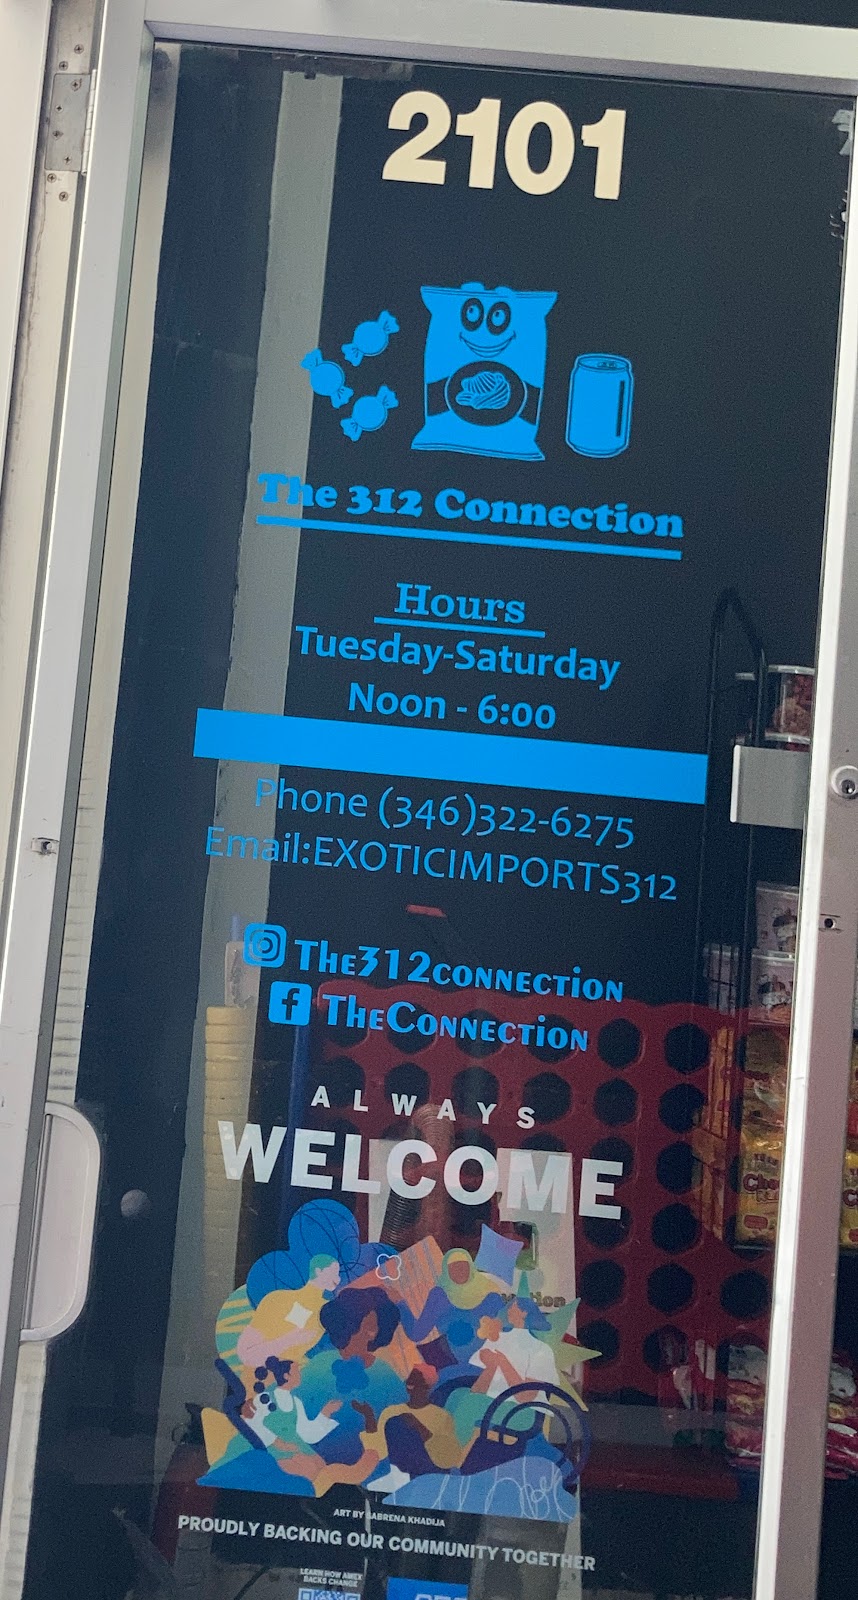 THE 312 CONNECTION | 2101 Belvidere Rd, Waukegan, IL 60085, USA | Phone: (346) 322-6275